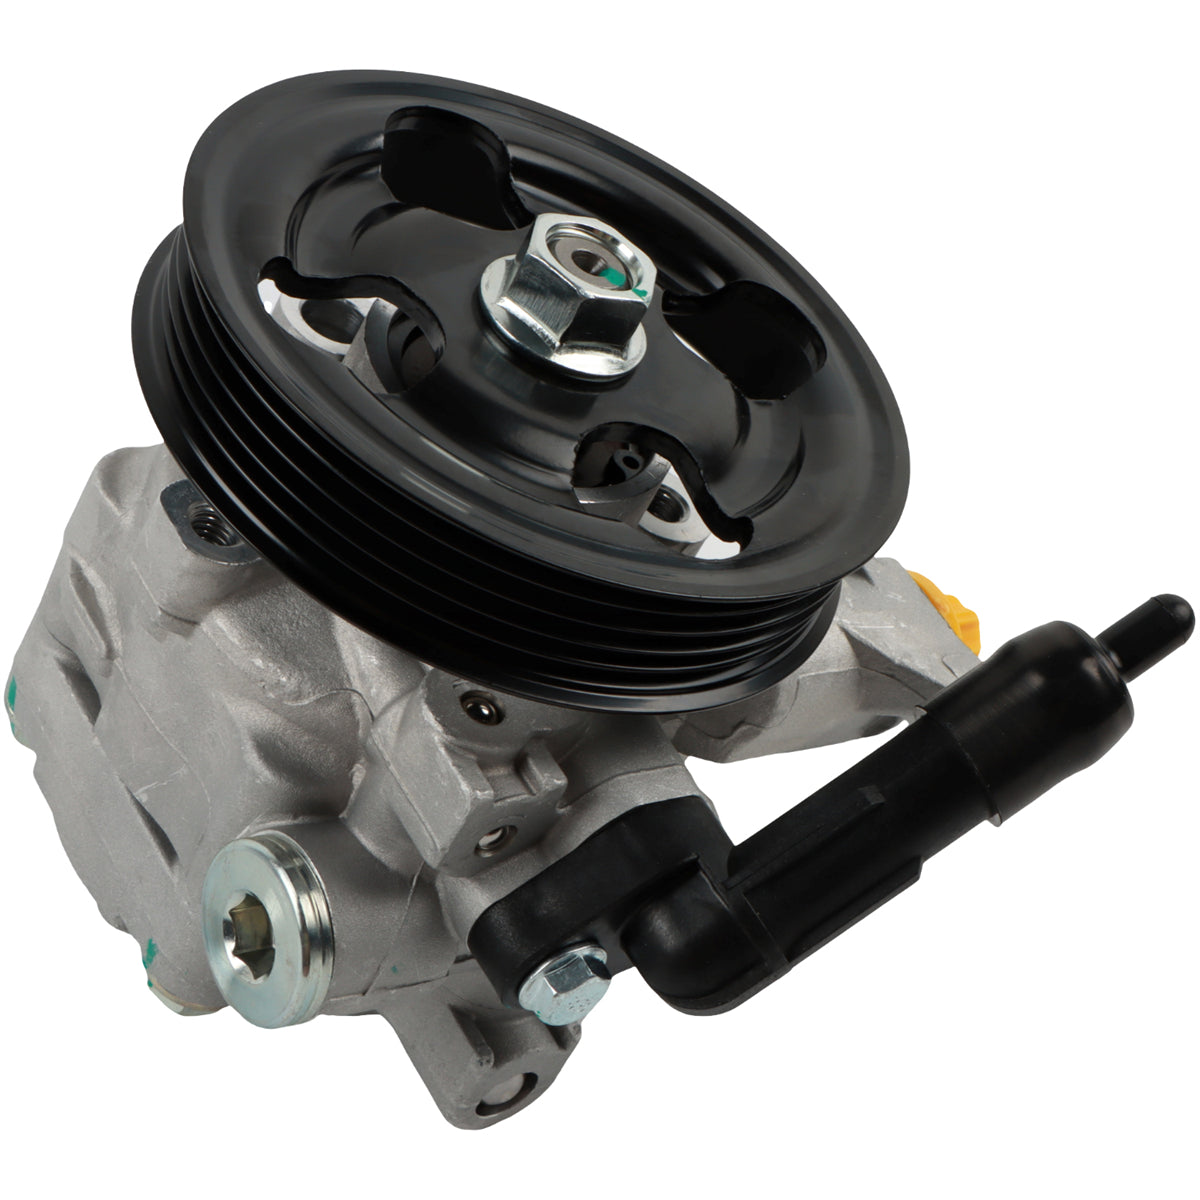 Daysyore® Power Steering Pump w/ Pulley 21-5196 for 2005-2009 Subaru Legacy Outback 2.5L